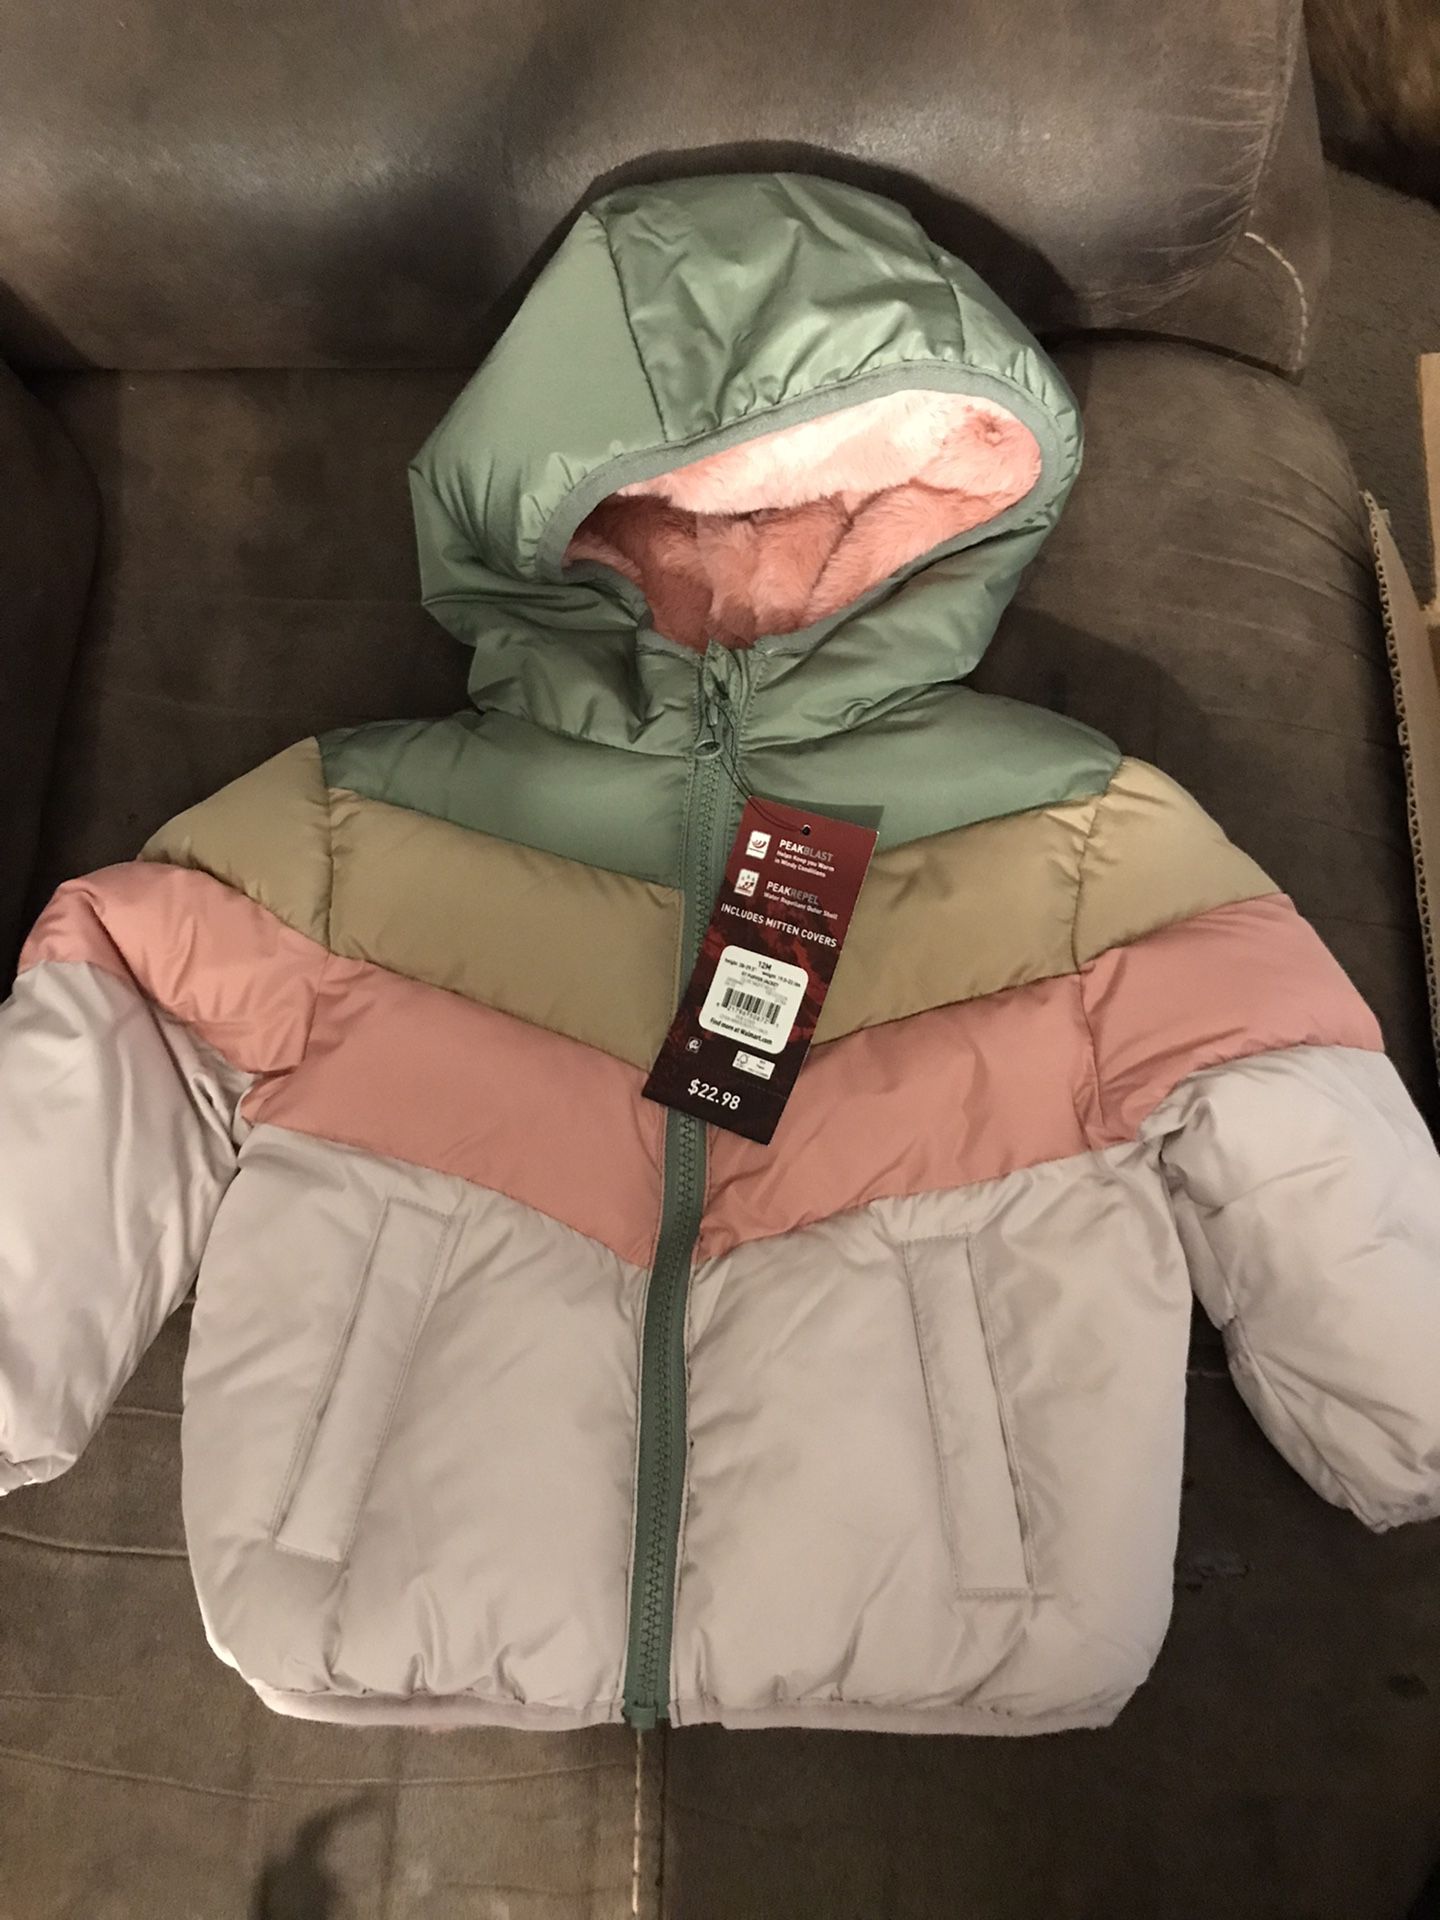 NWT girls’ winter jackets 12 month-4/5